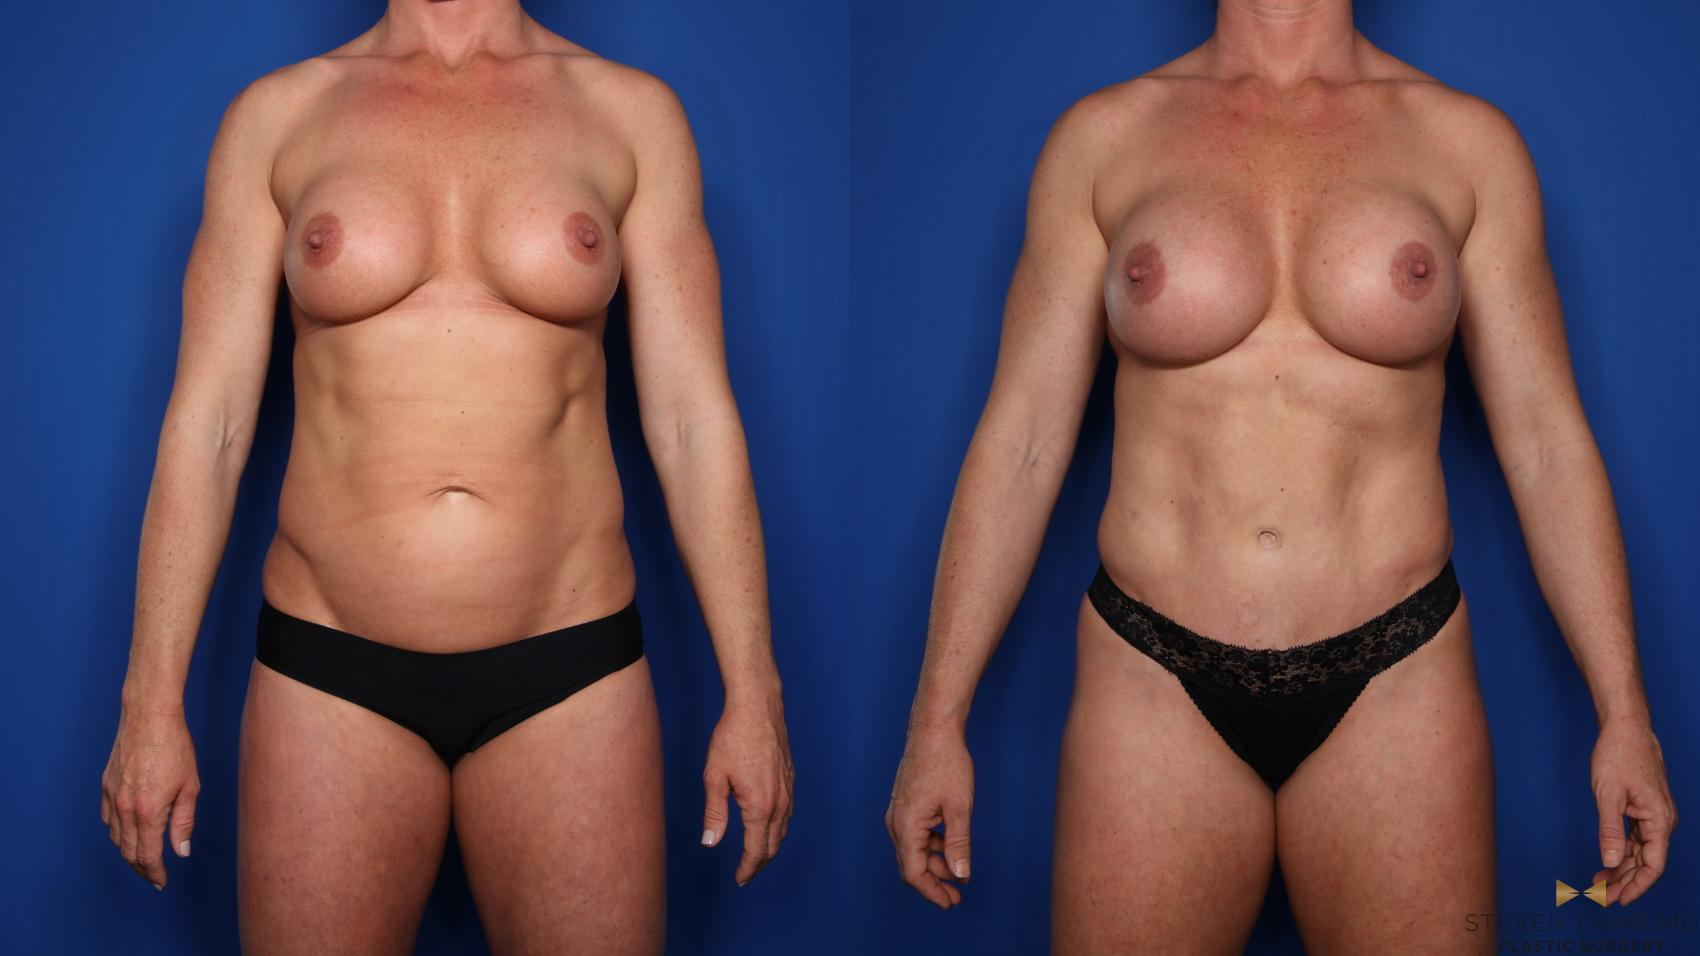 Liposuction Before & After Photo | Fort Worth, Texas | Steven Camp MD Plastic Surgery